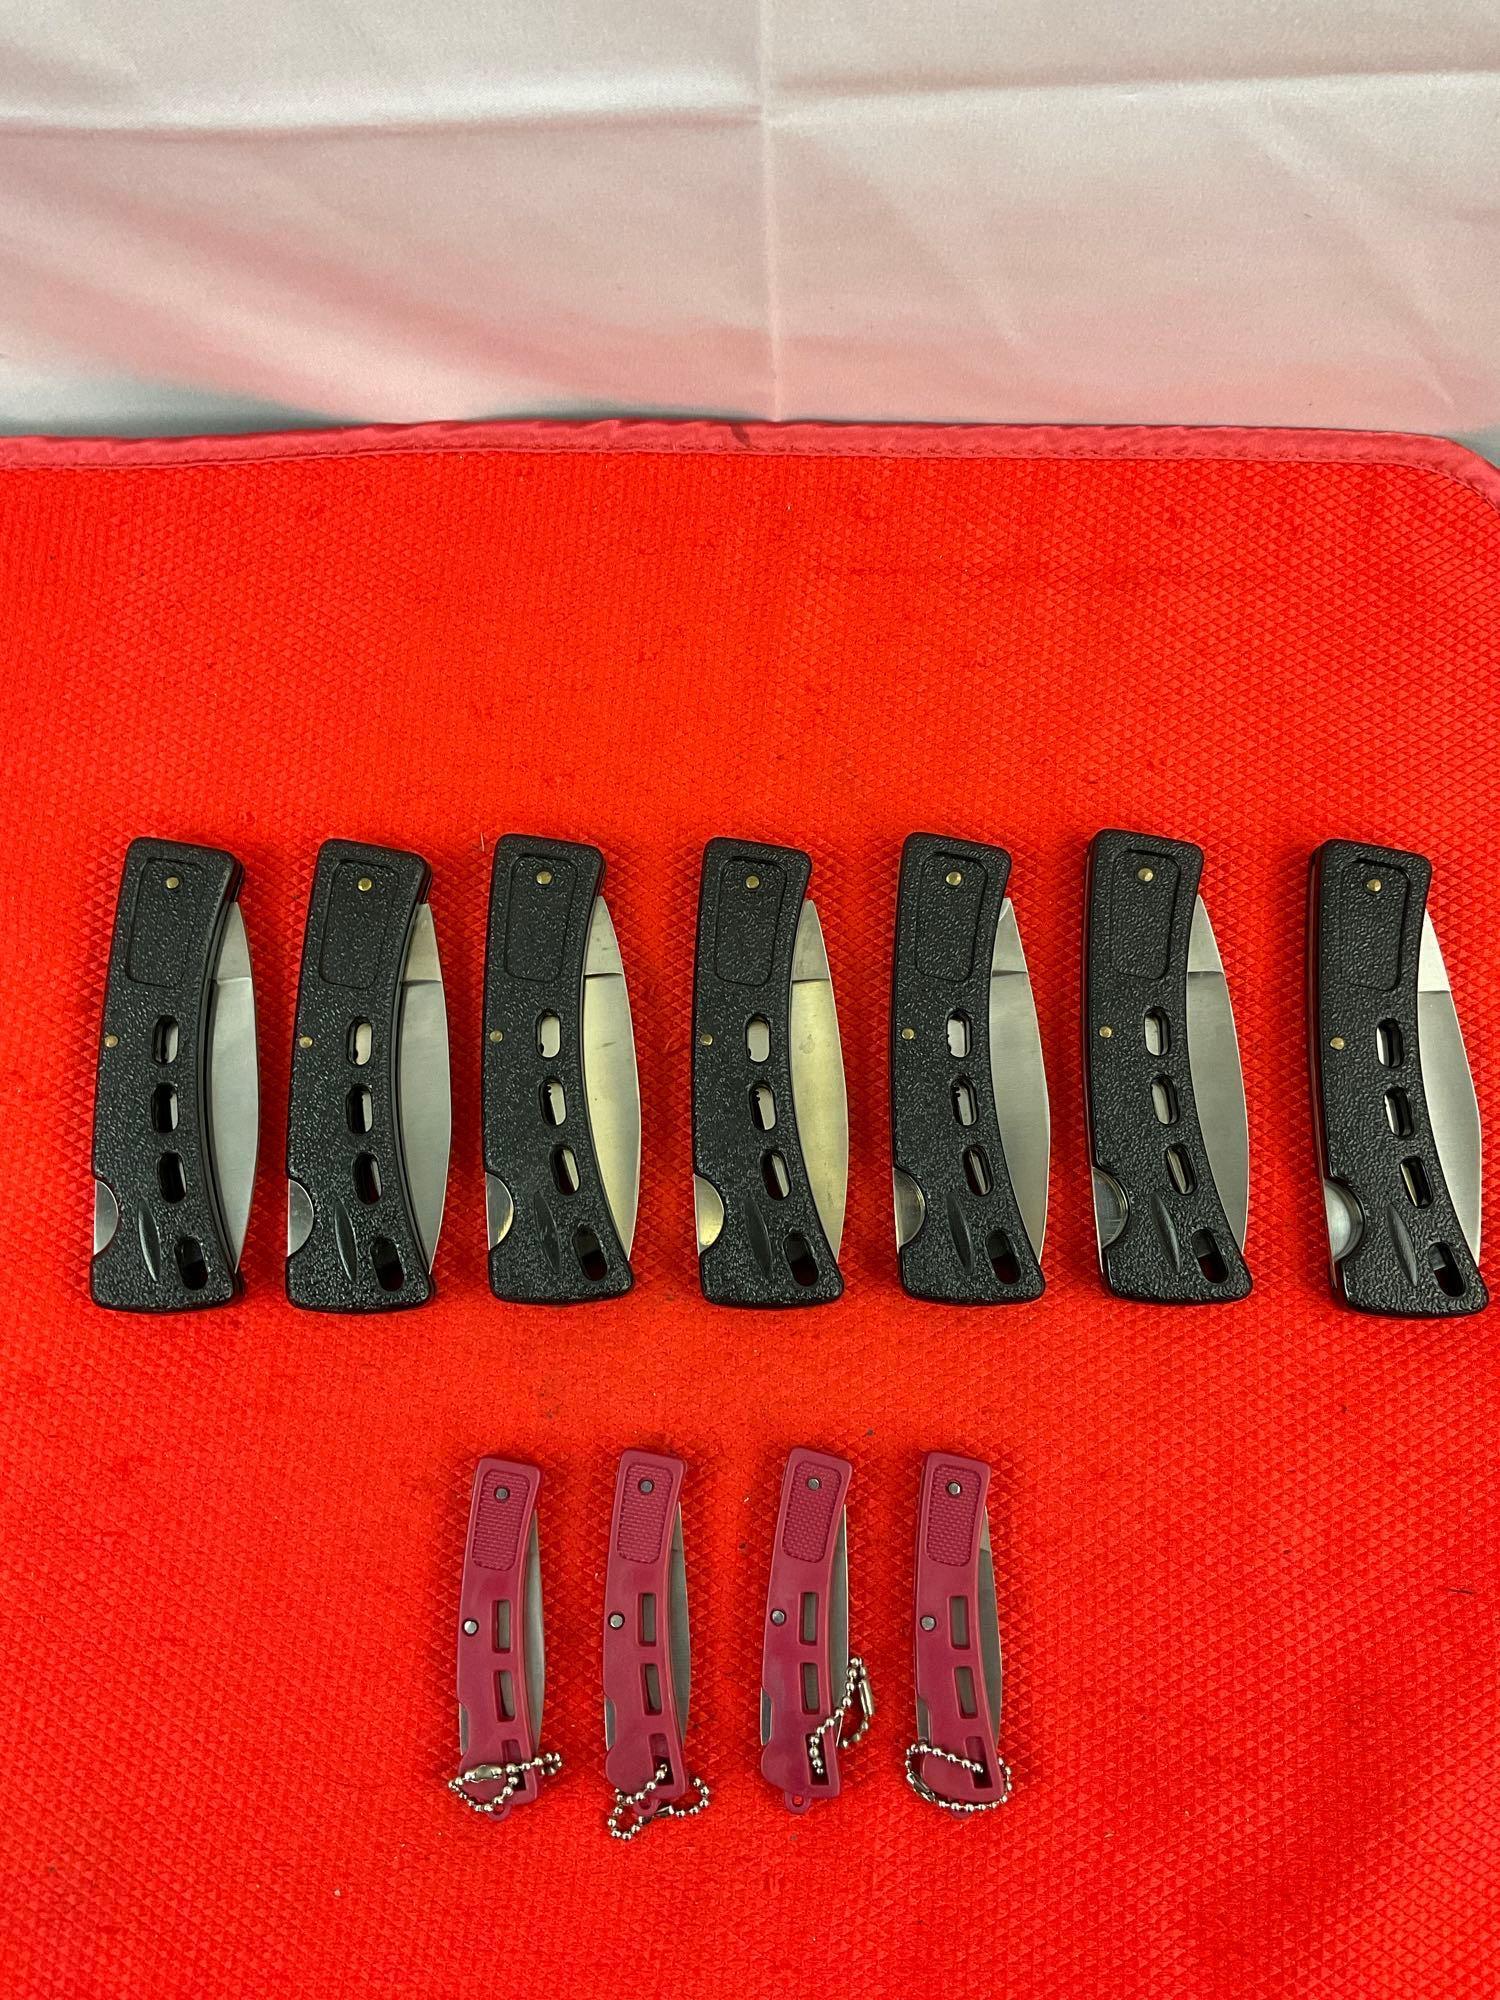 11 pcs Modern Steel Folding Blade Pocket Hunting Knives. Unknown Makers, Unknown Models. See pics.